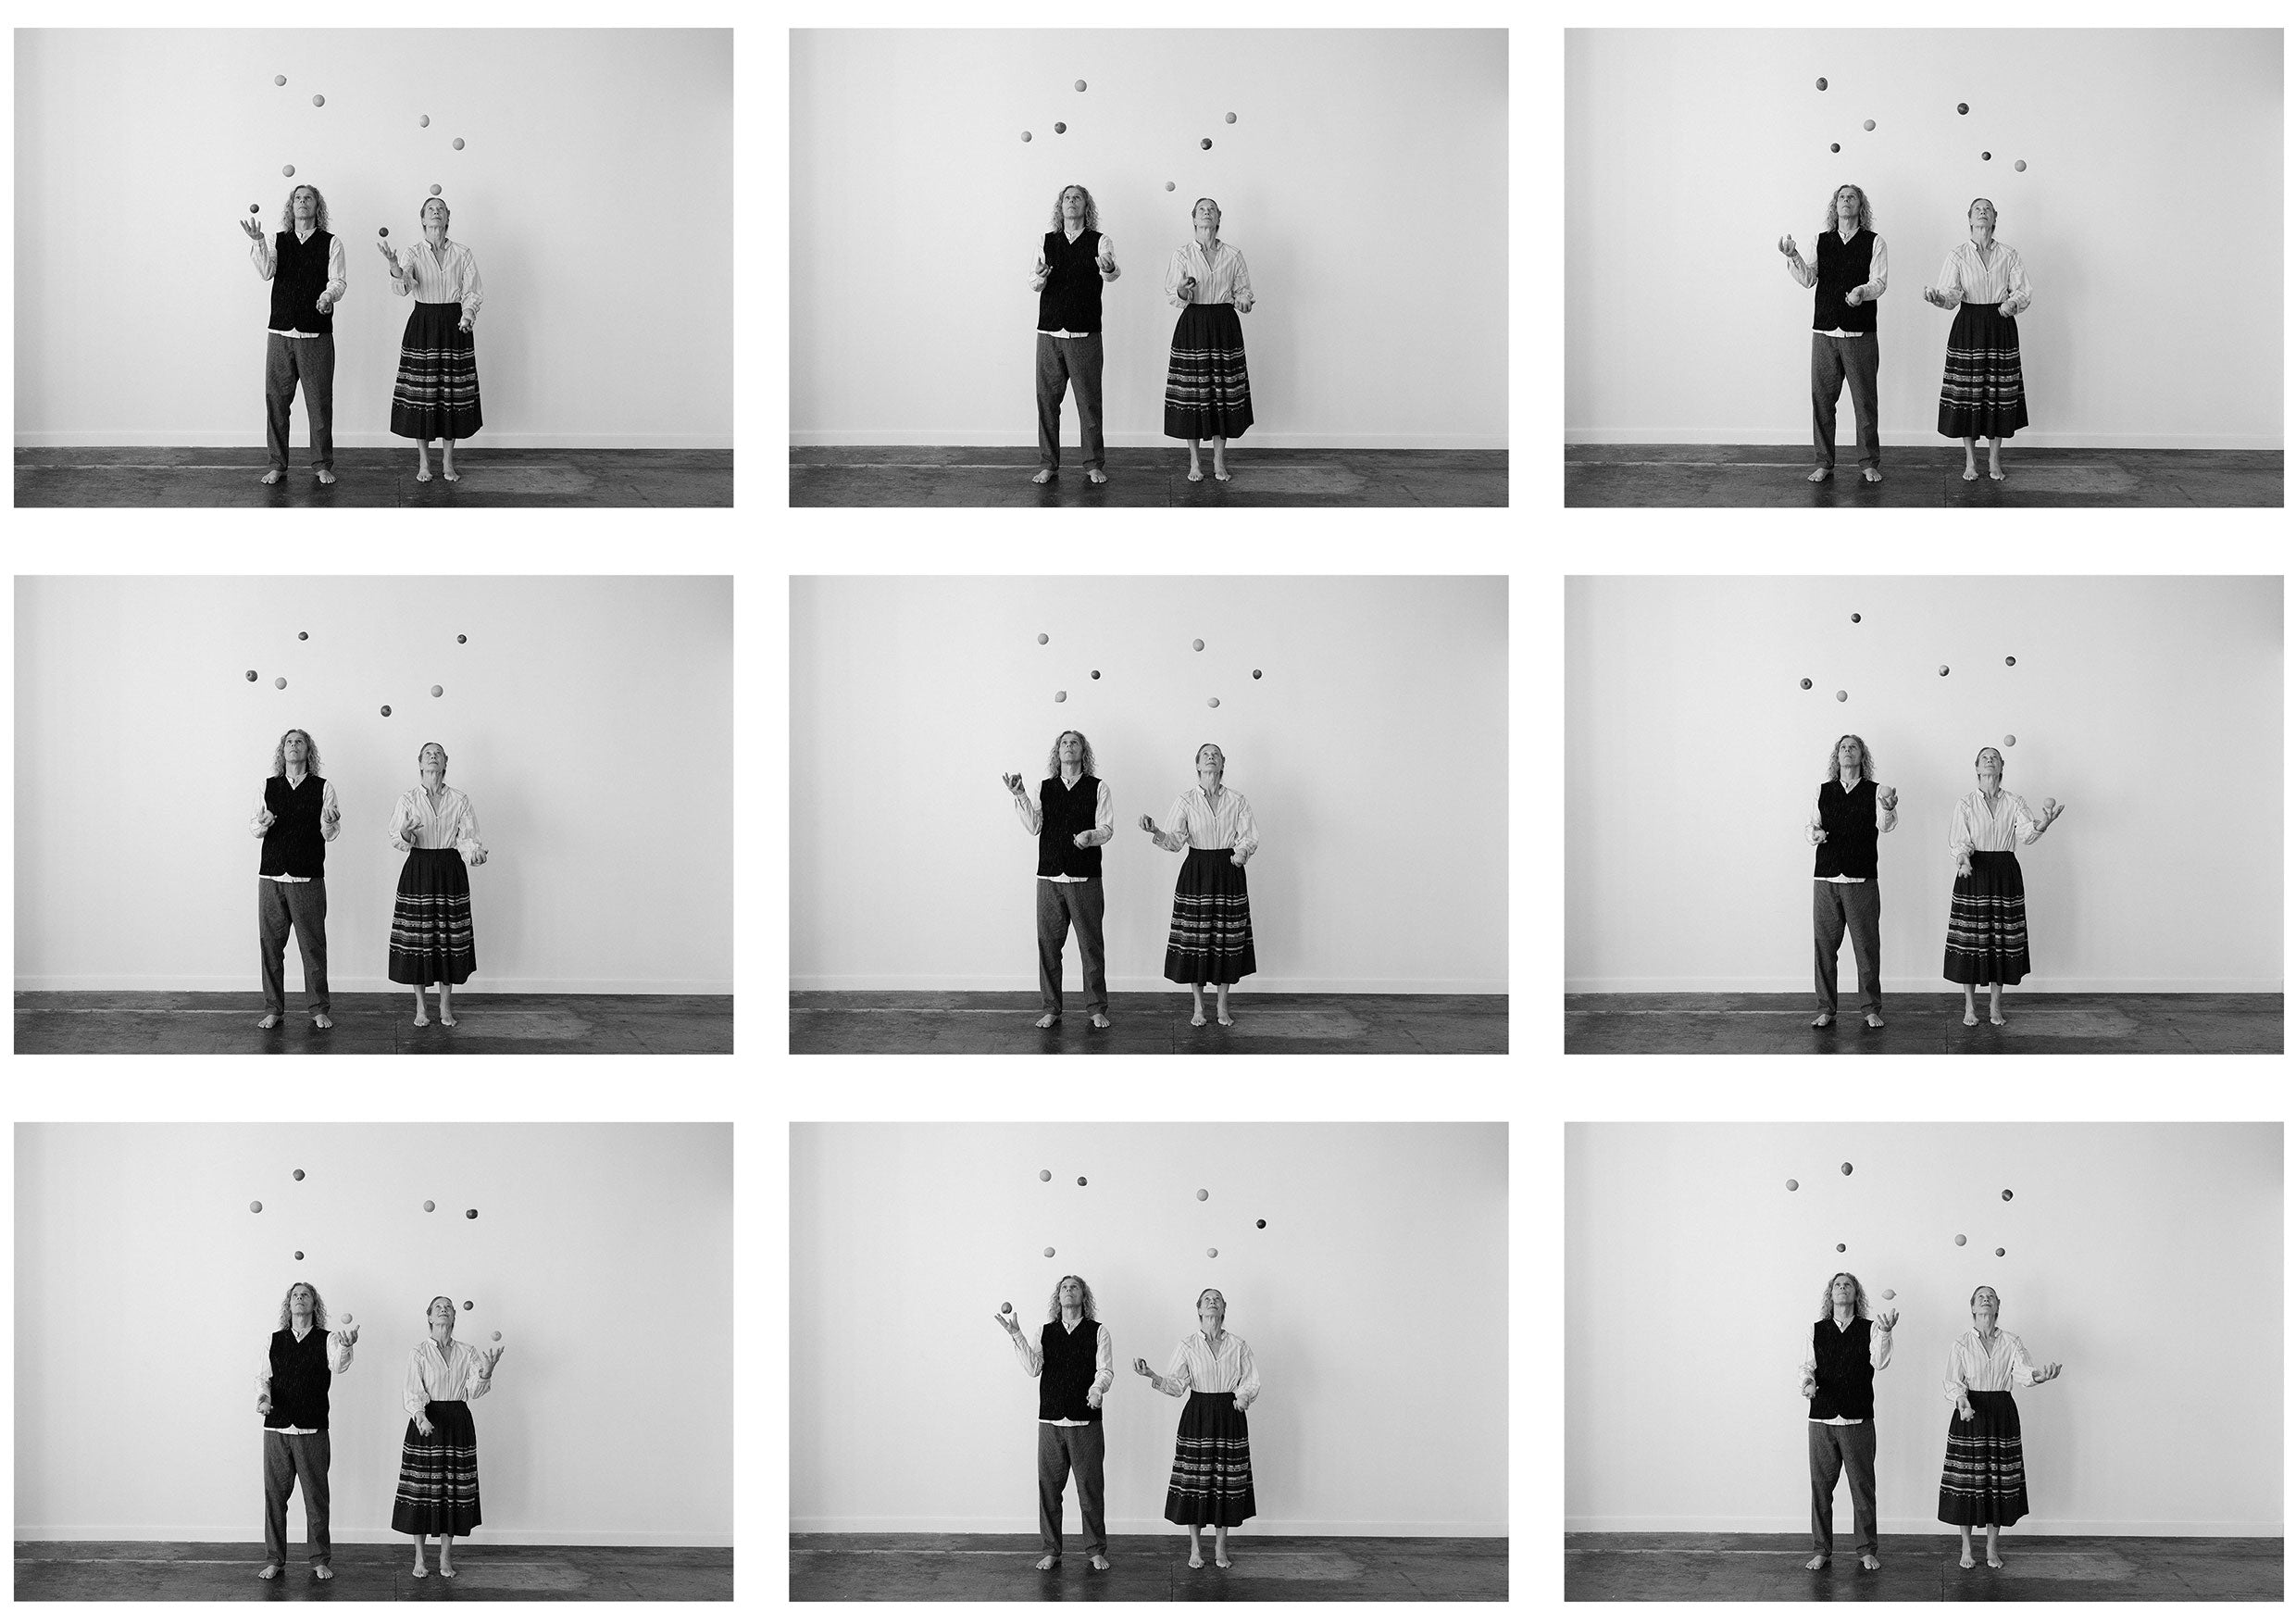 Contact sheet of two people juggling